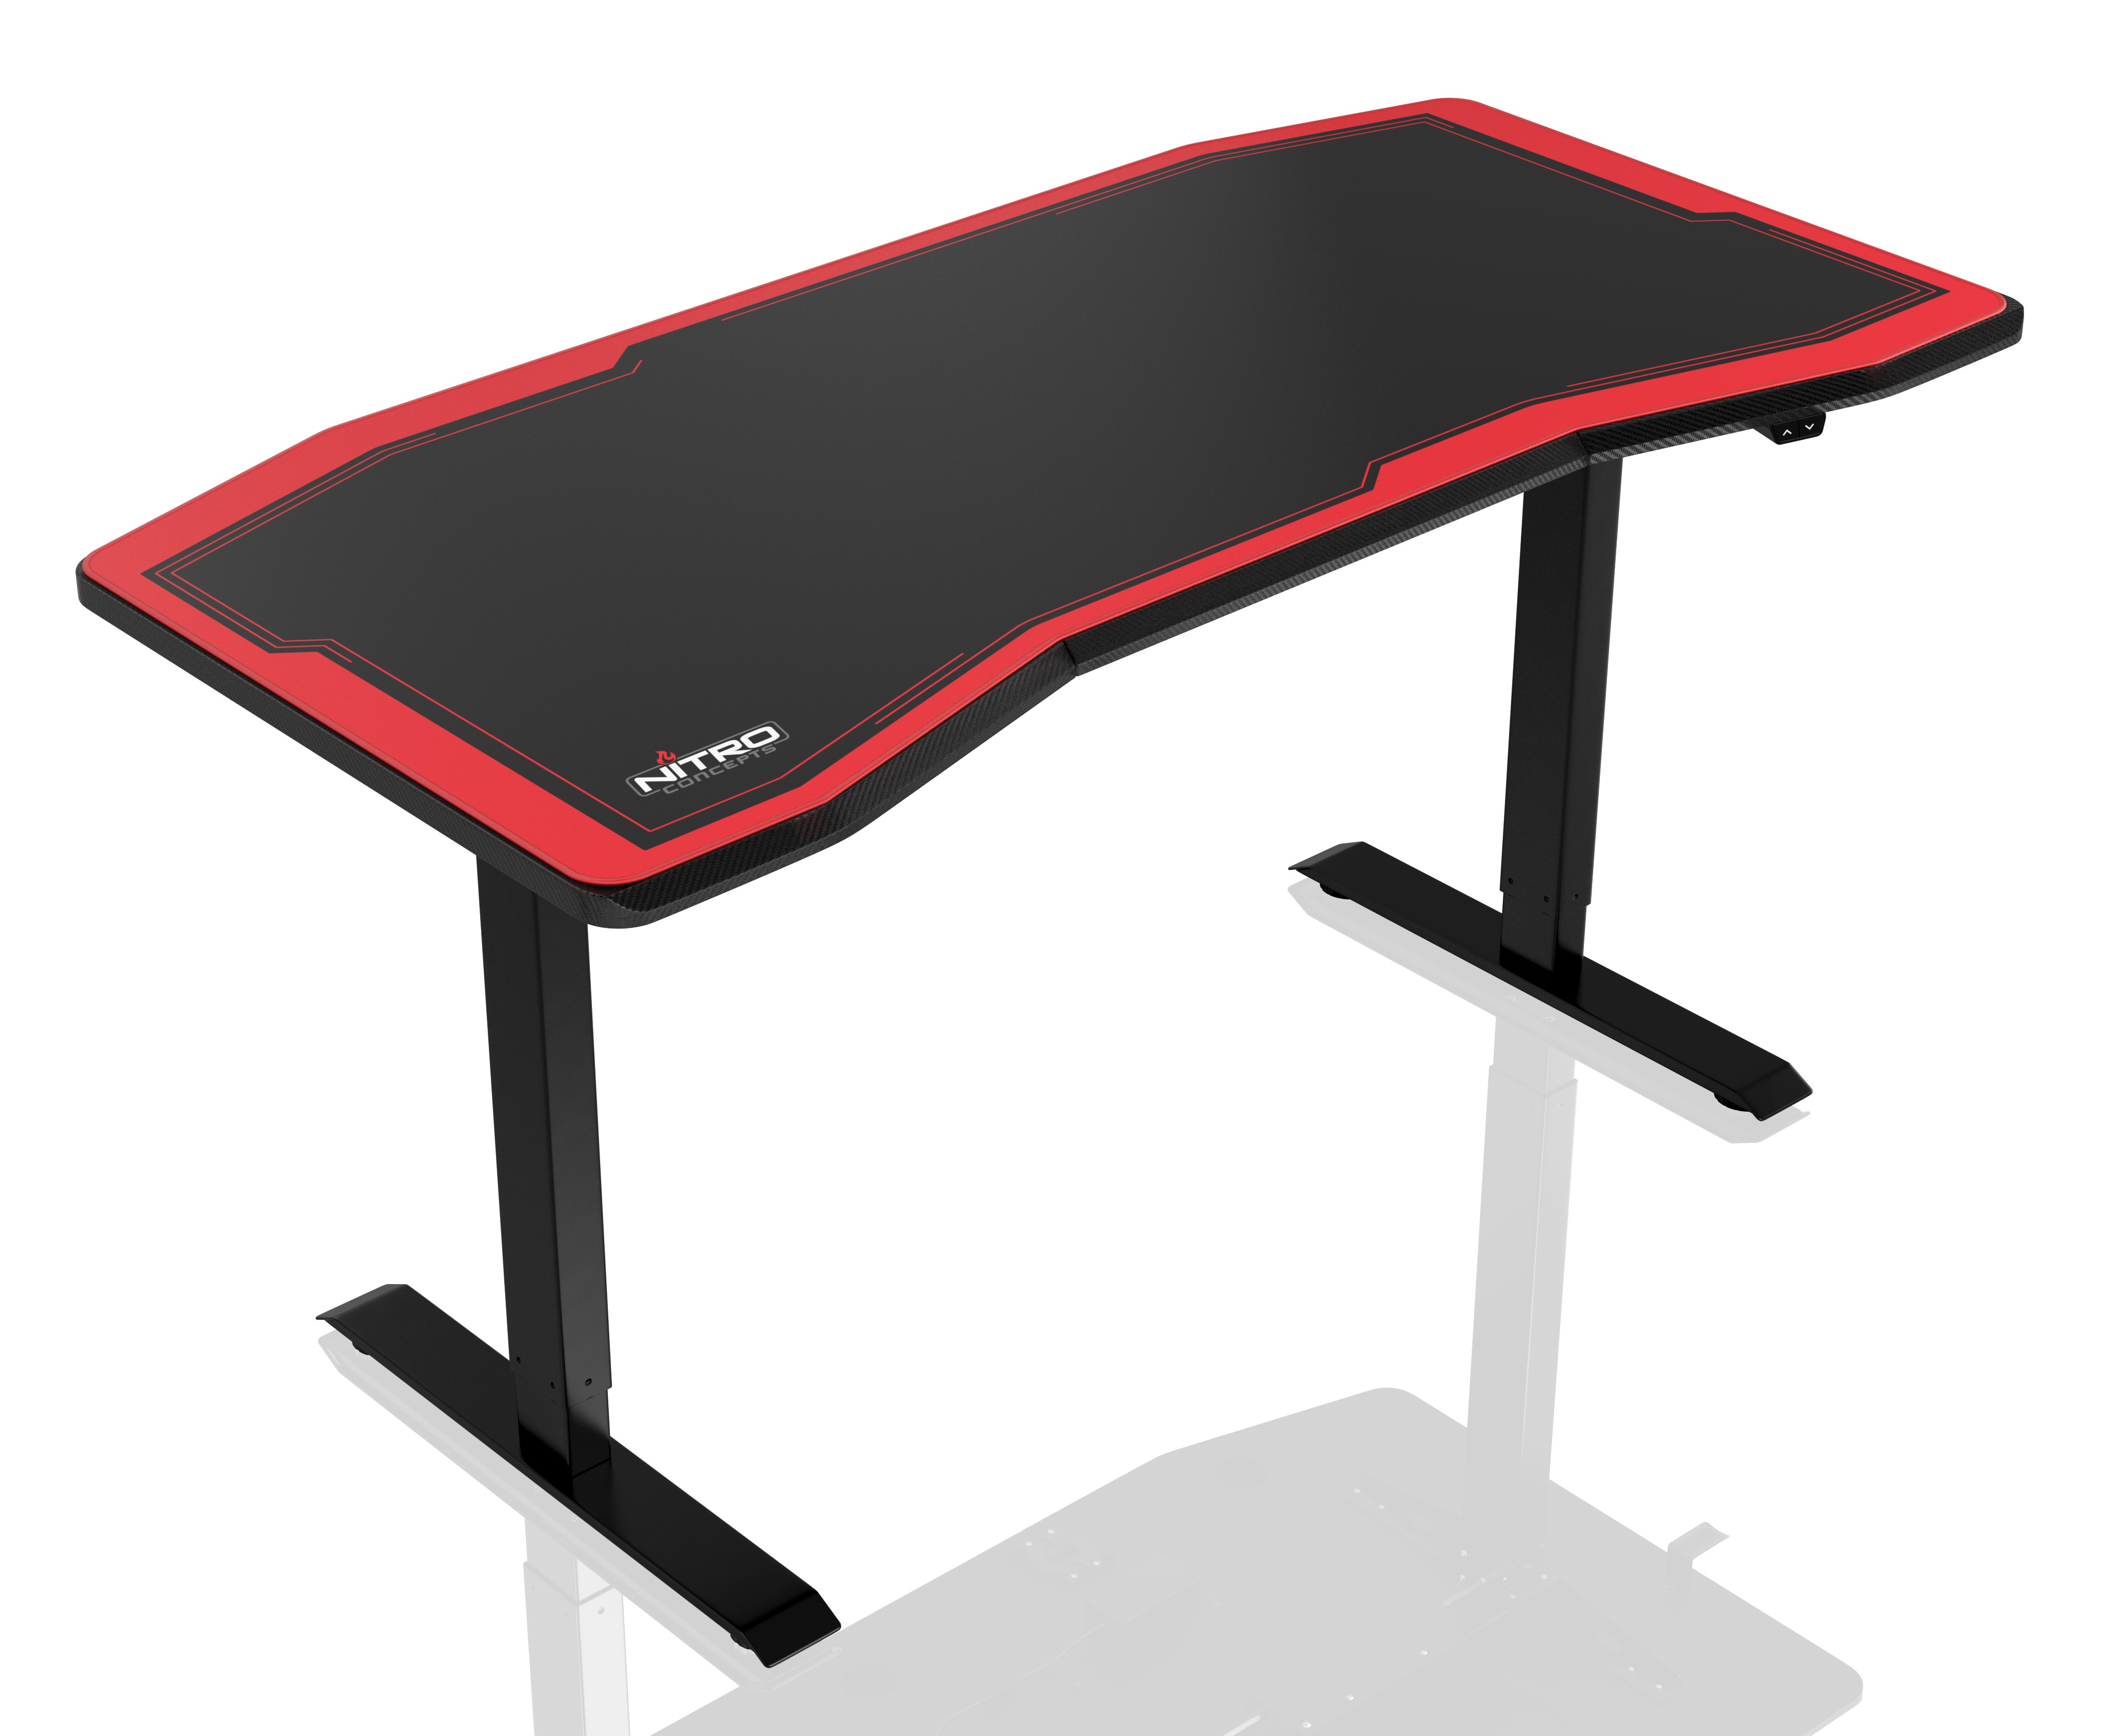 Nitro Concepts D16E Electric Adjustable Sit/Stand Gaming Desk - Carbon Red